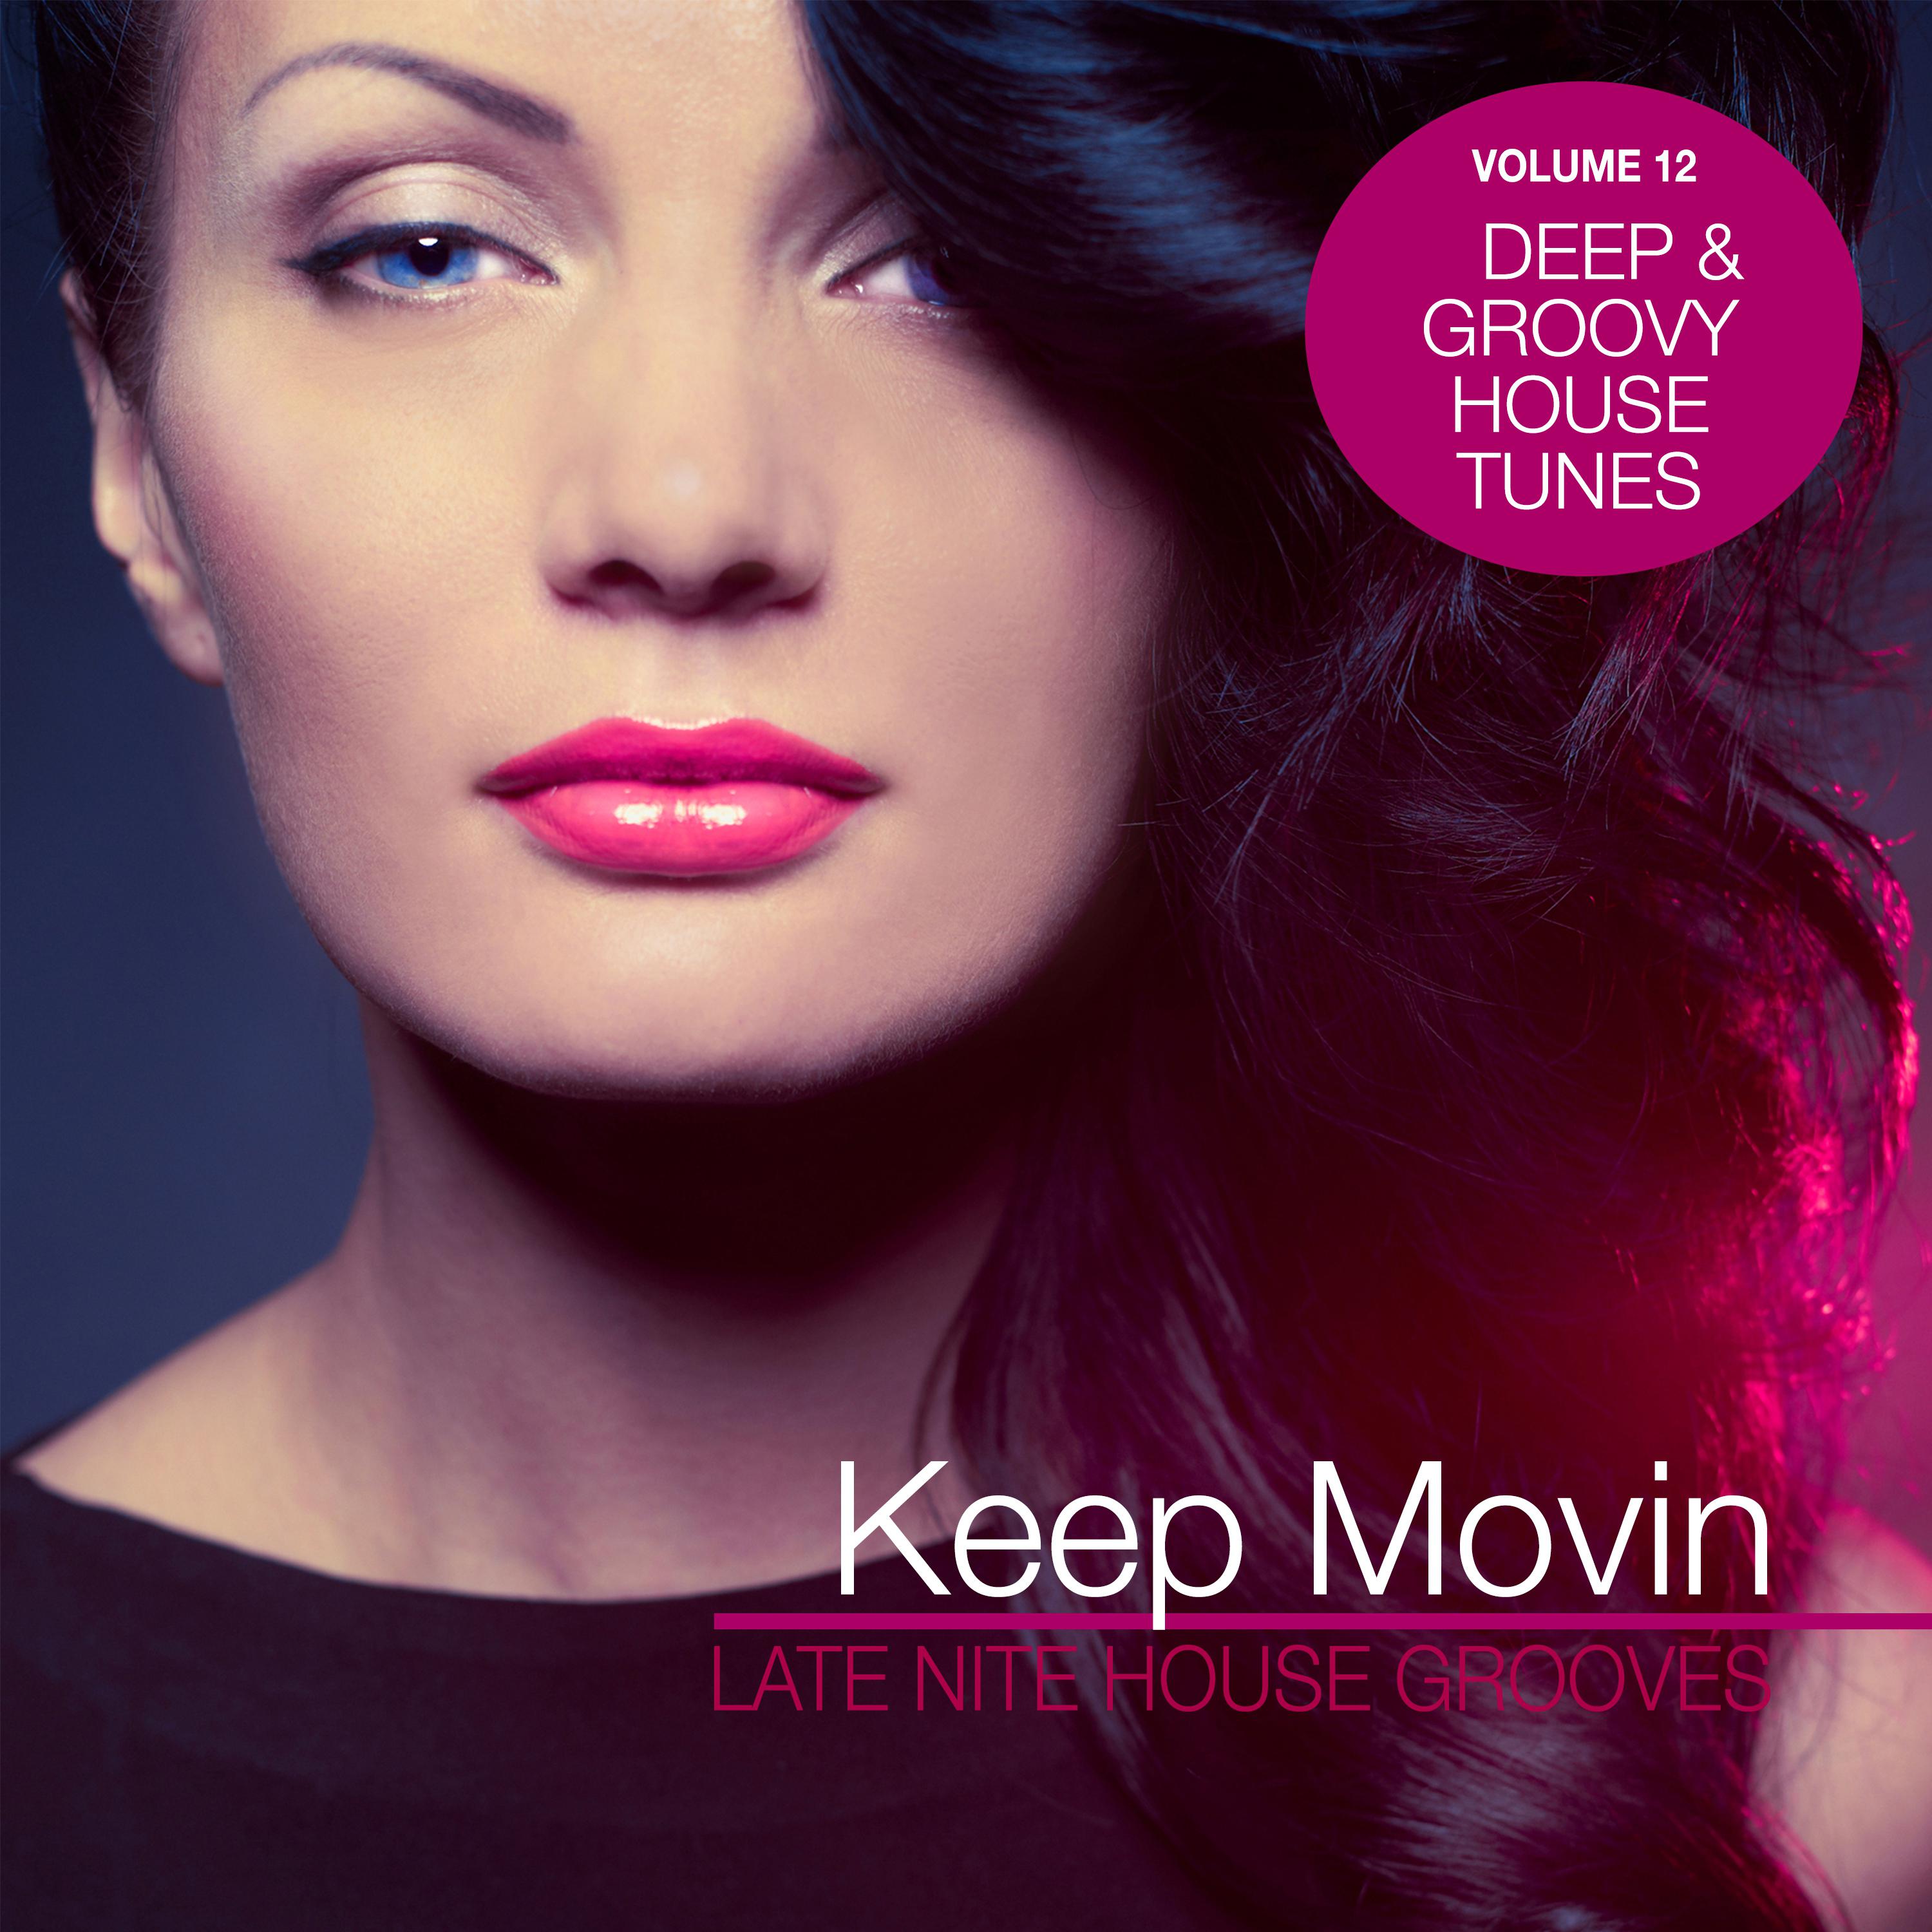 Keep Movin - Late Nite House Grooves, Vol. 12